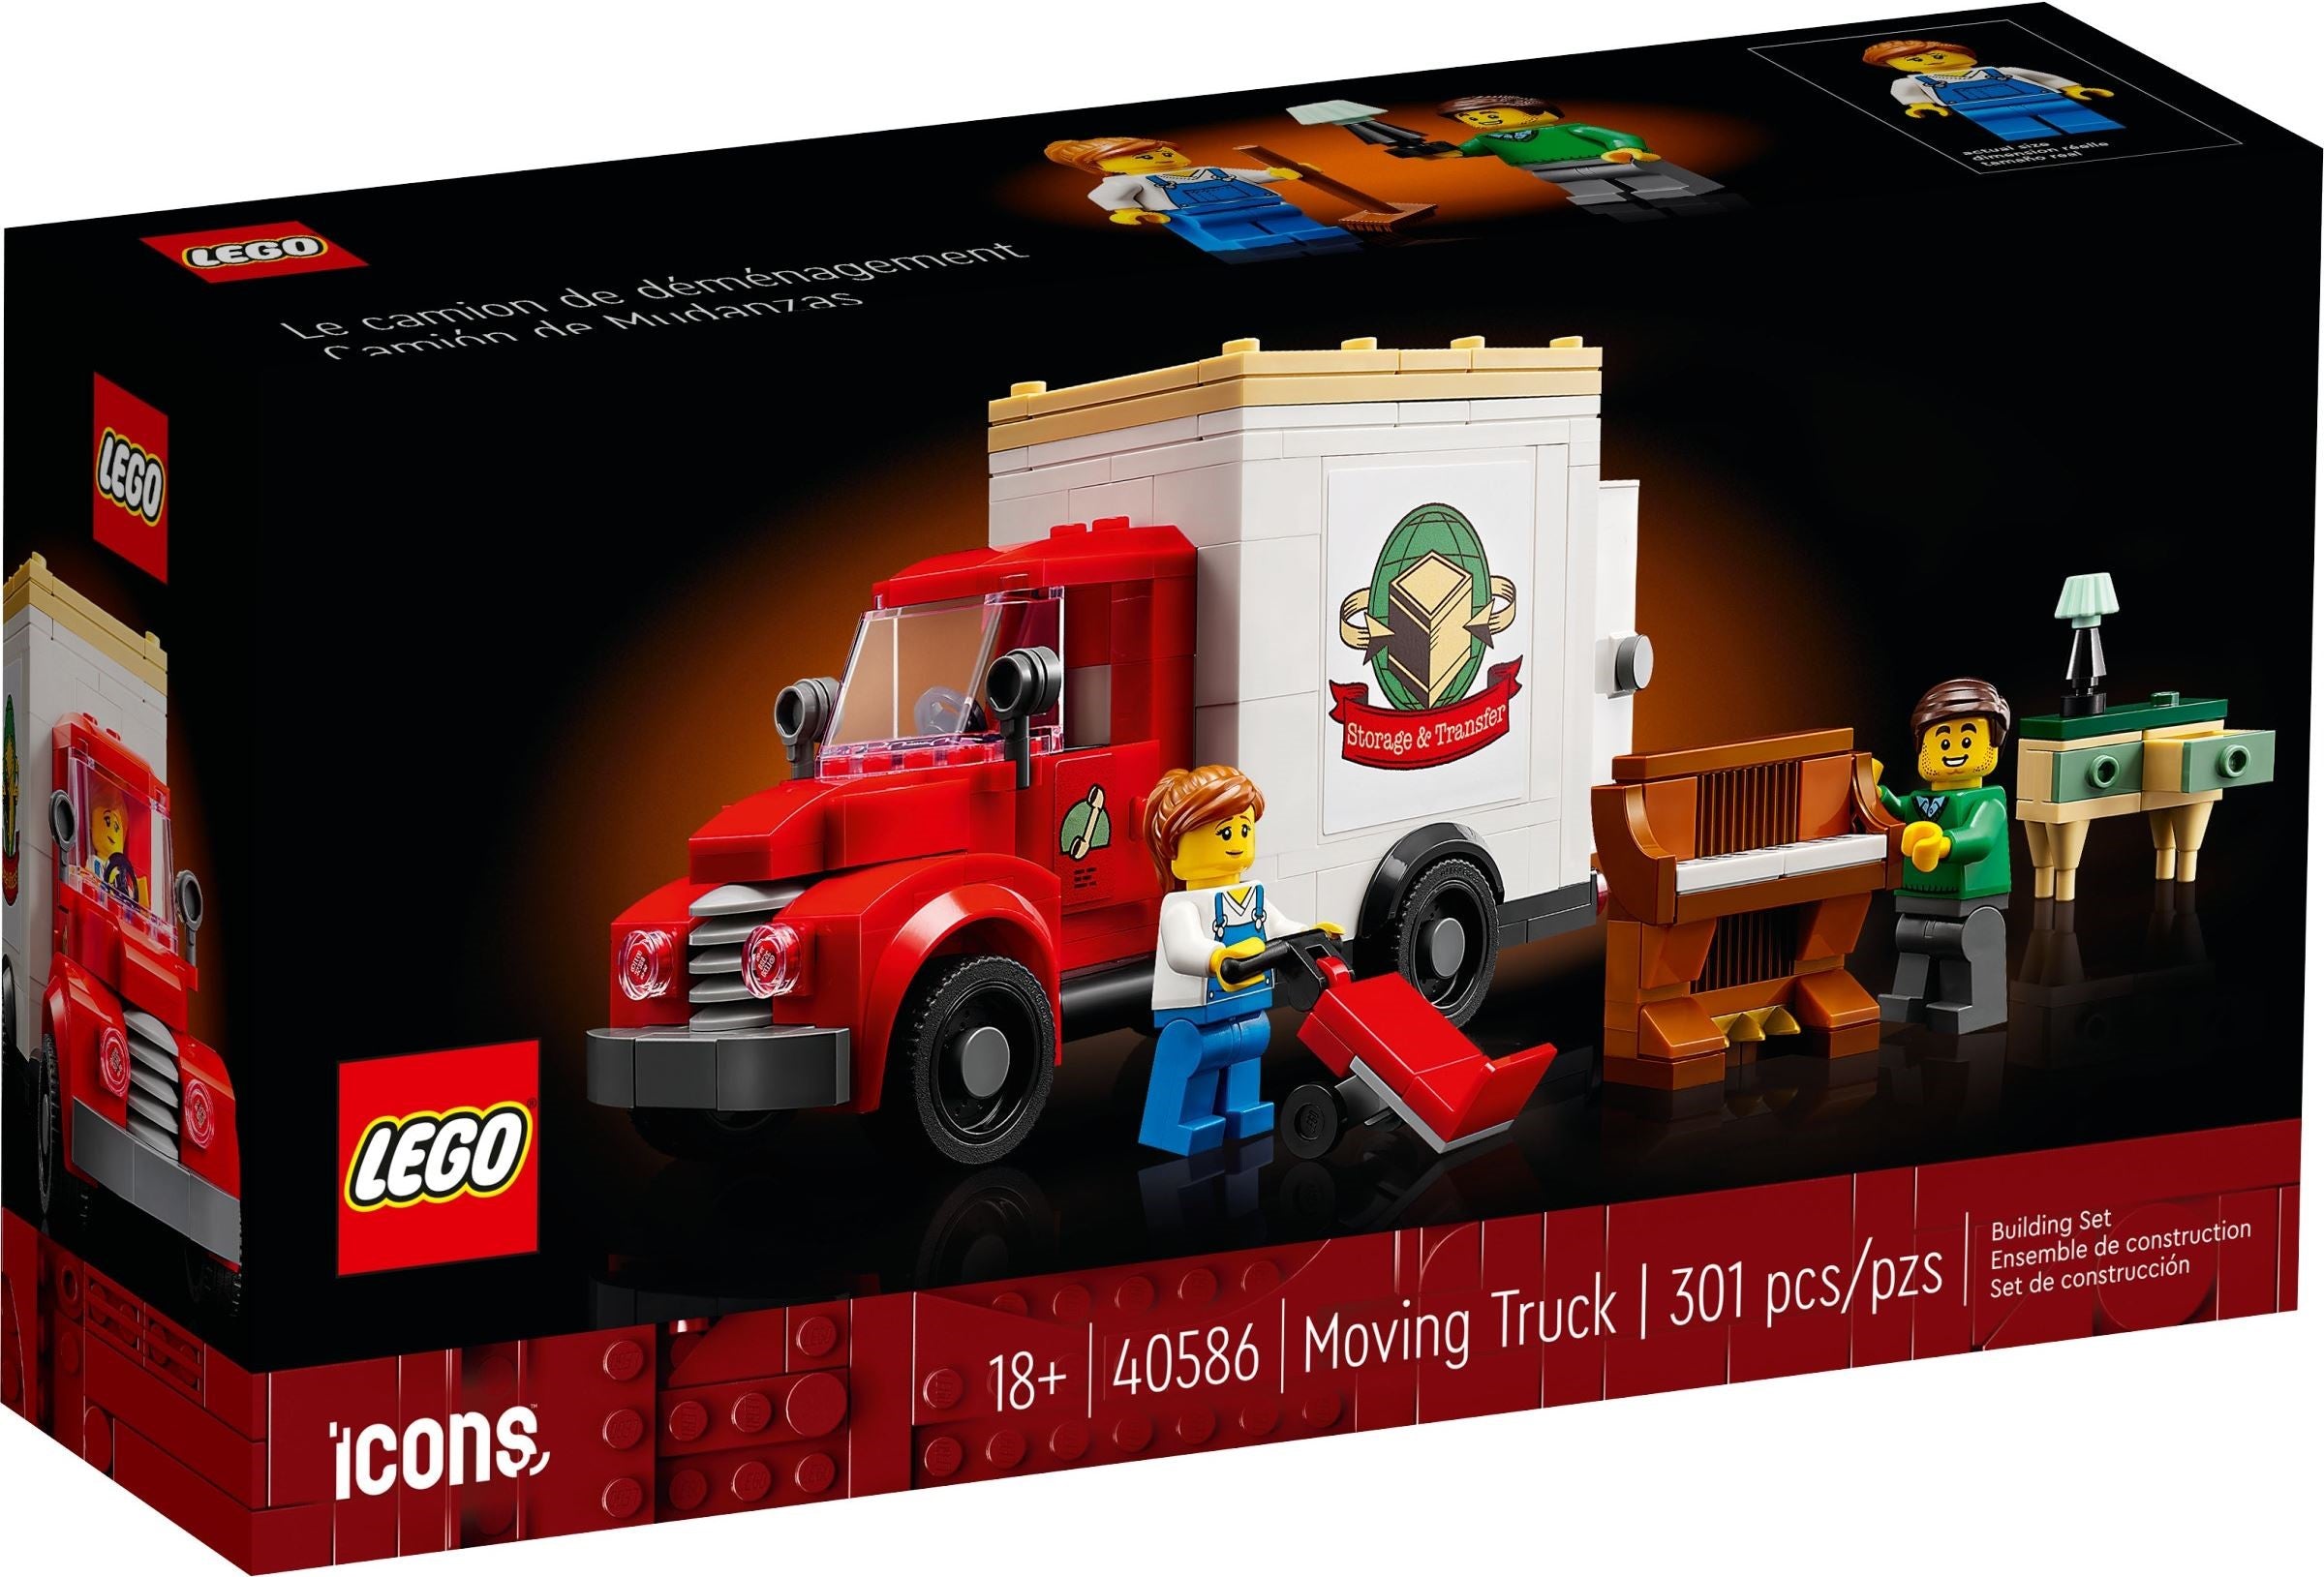 Lego Exclusive 40586 - Moving Truck